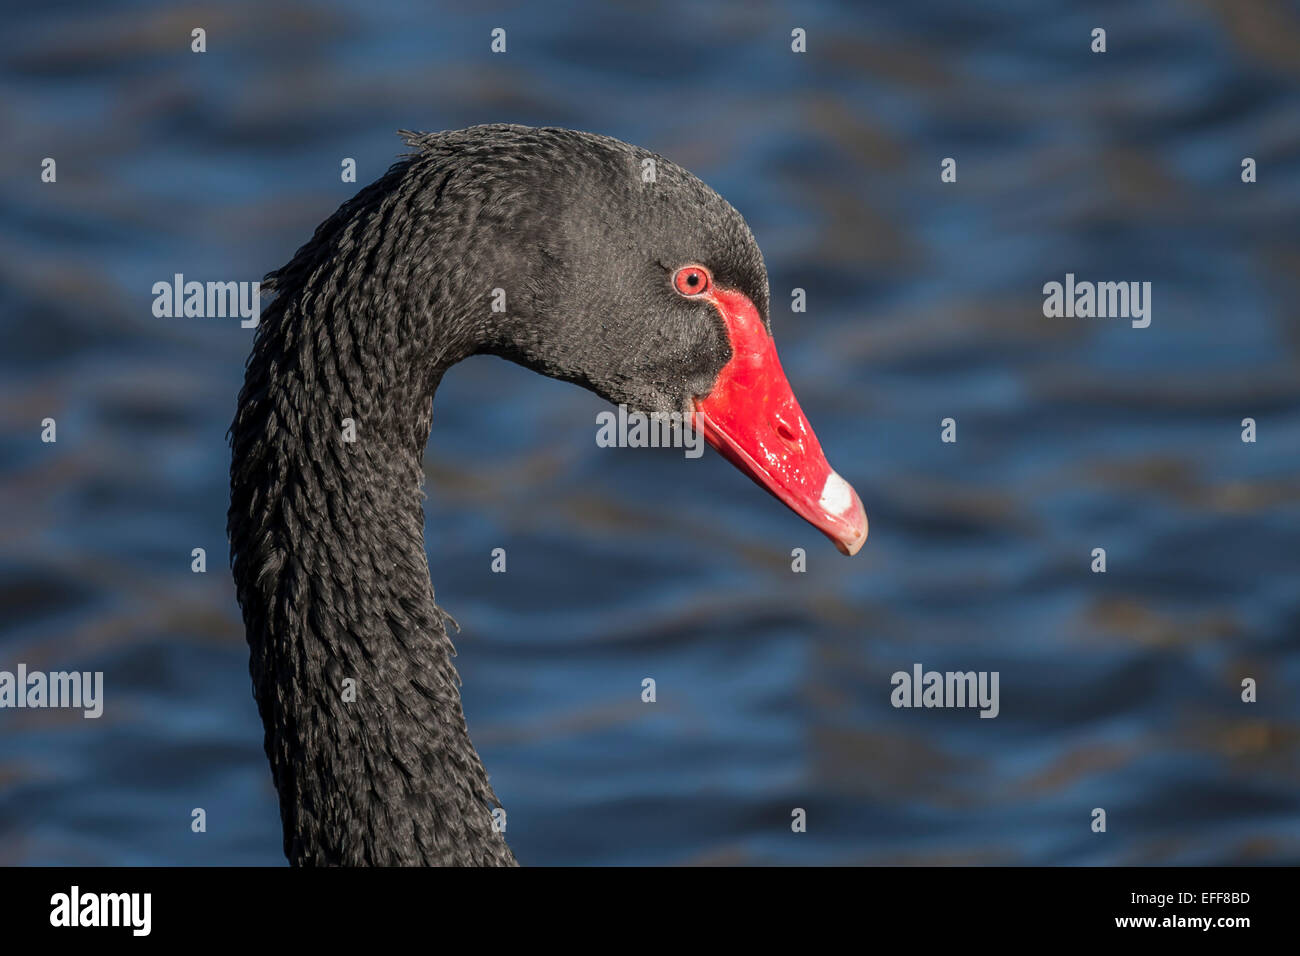 close portrait of the head and neck of a black swan Stock Photo